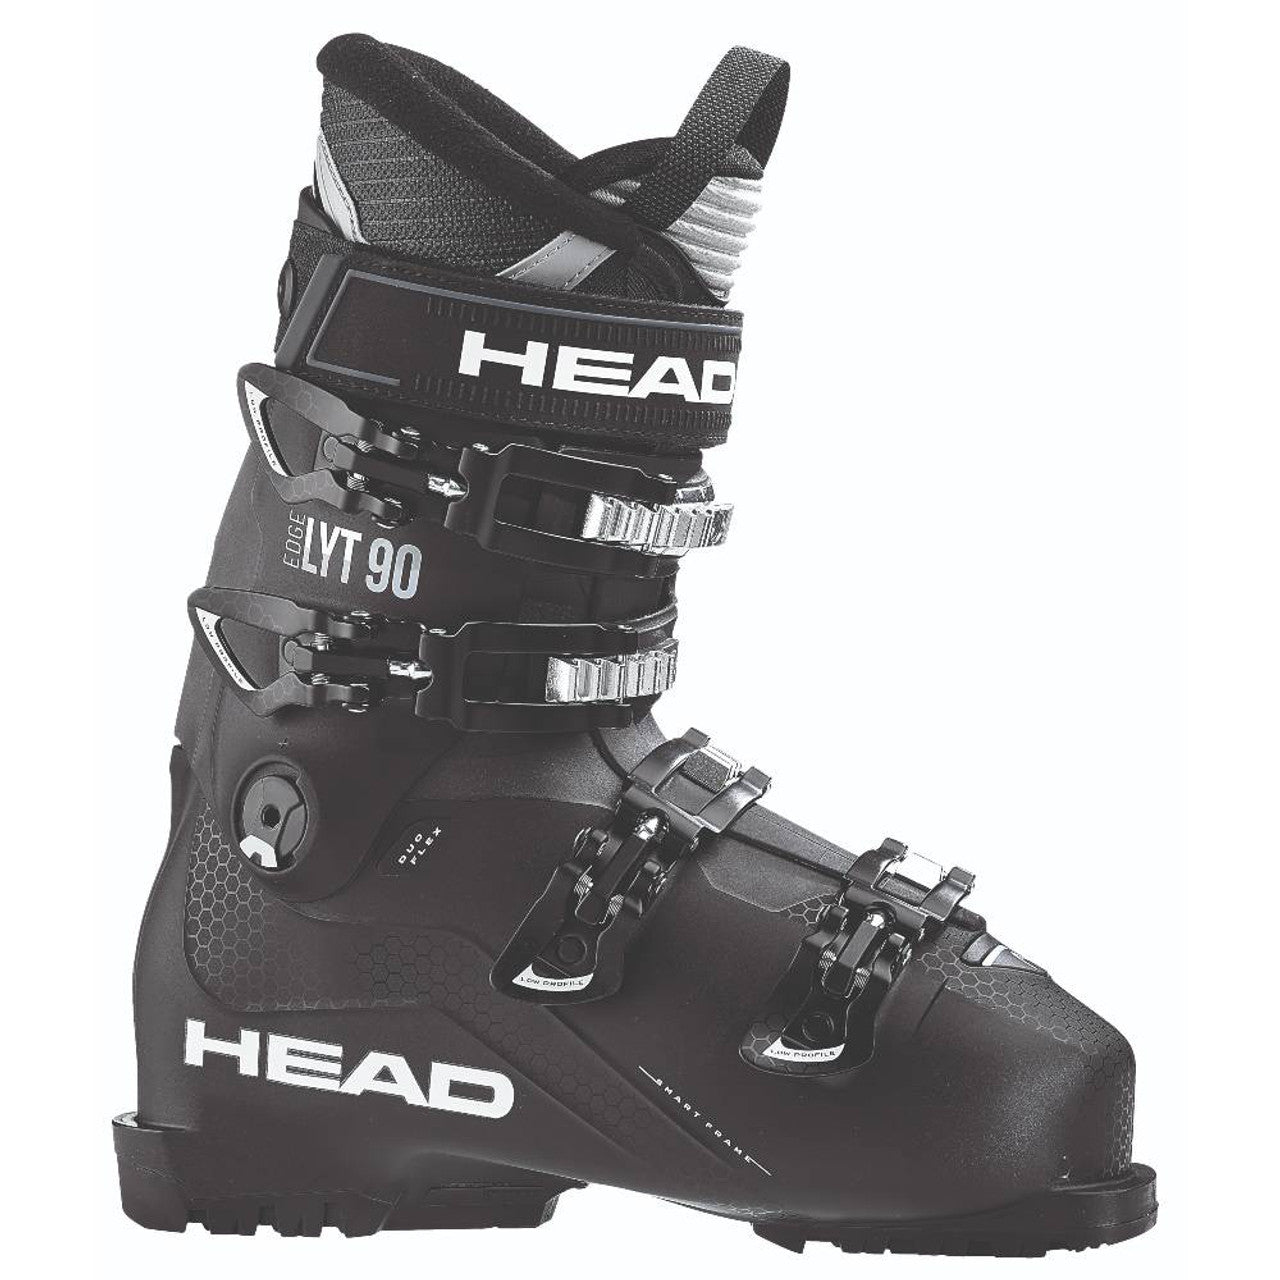 Head Edge Lyt 90 Ski Boots-Head-Sports Replay - Sports Excellence